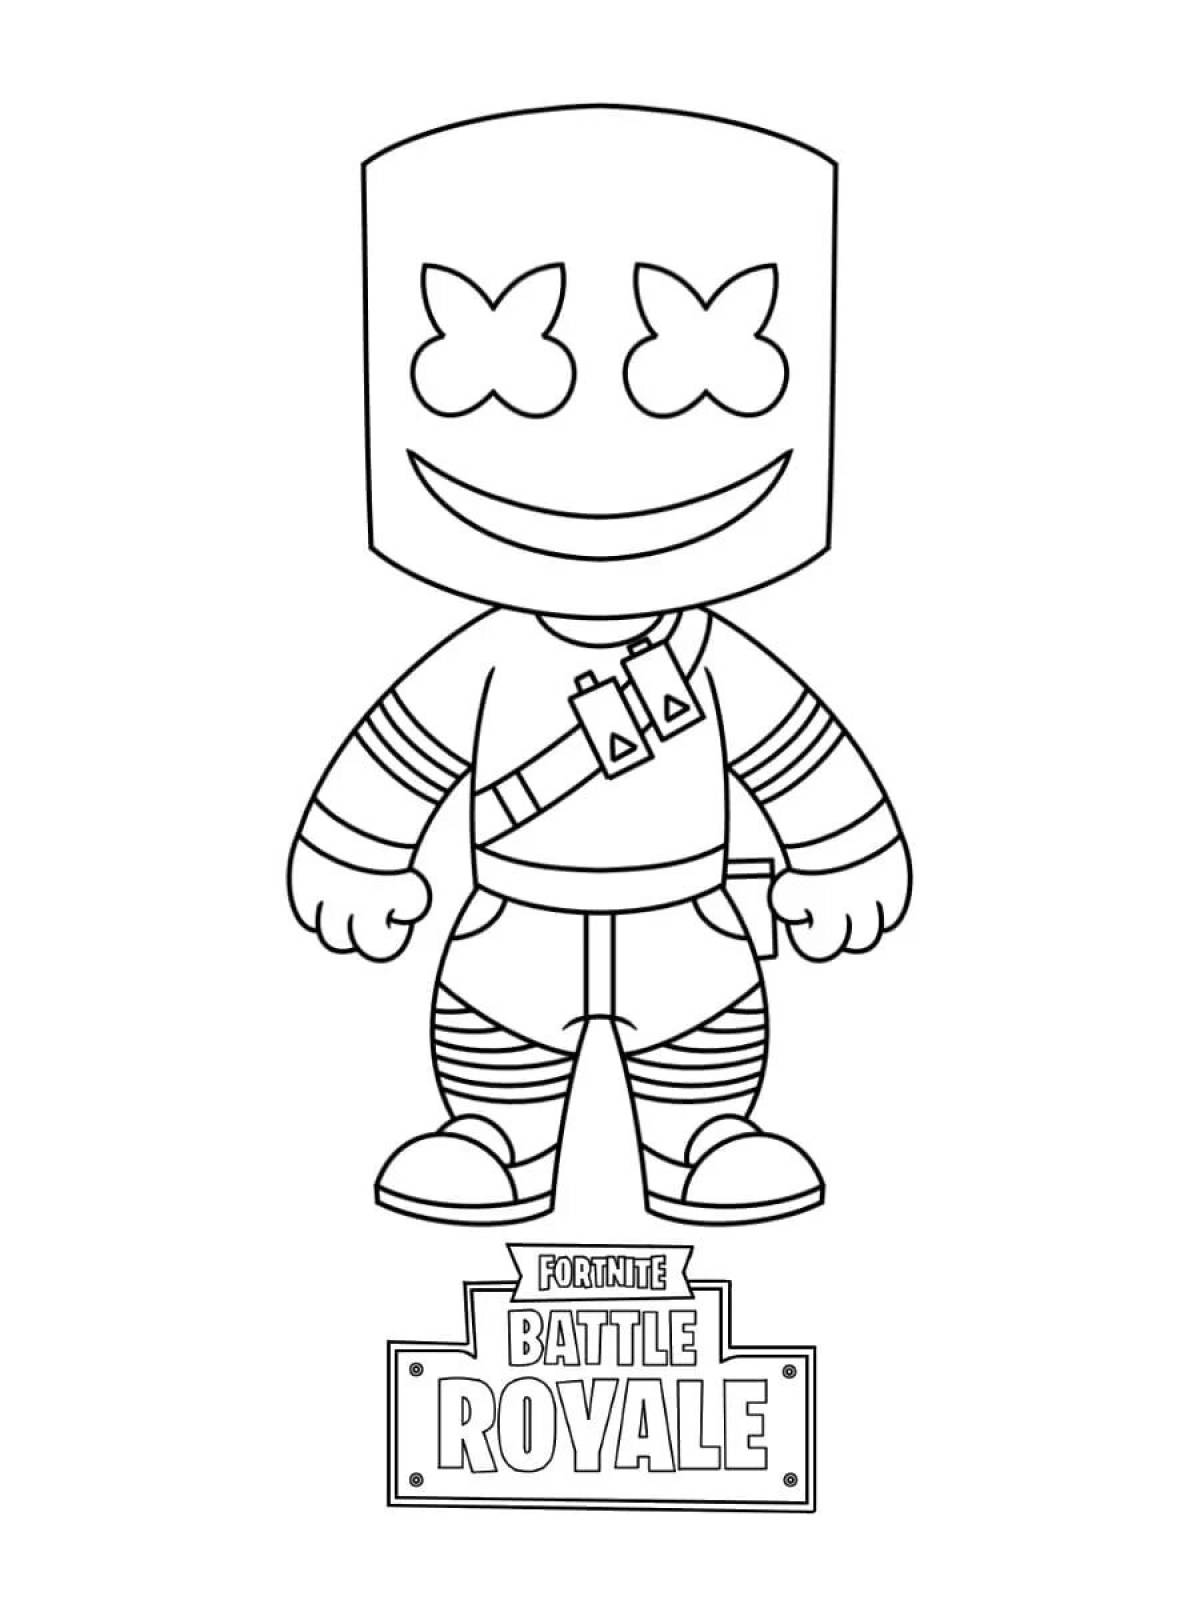 Fortnite marshmallow holiday coloring page